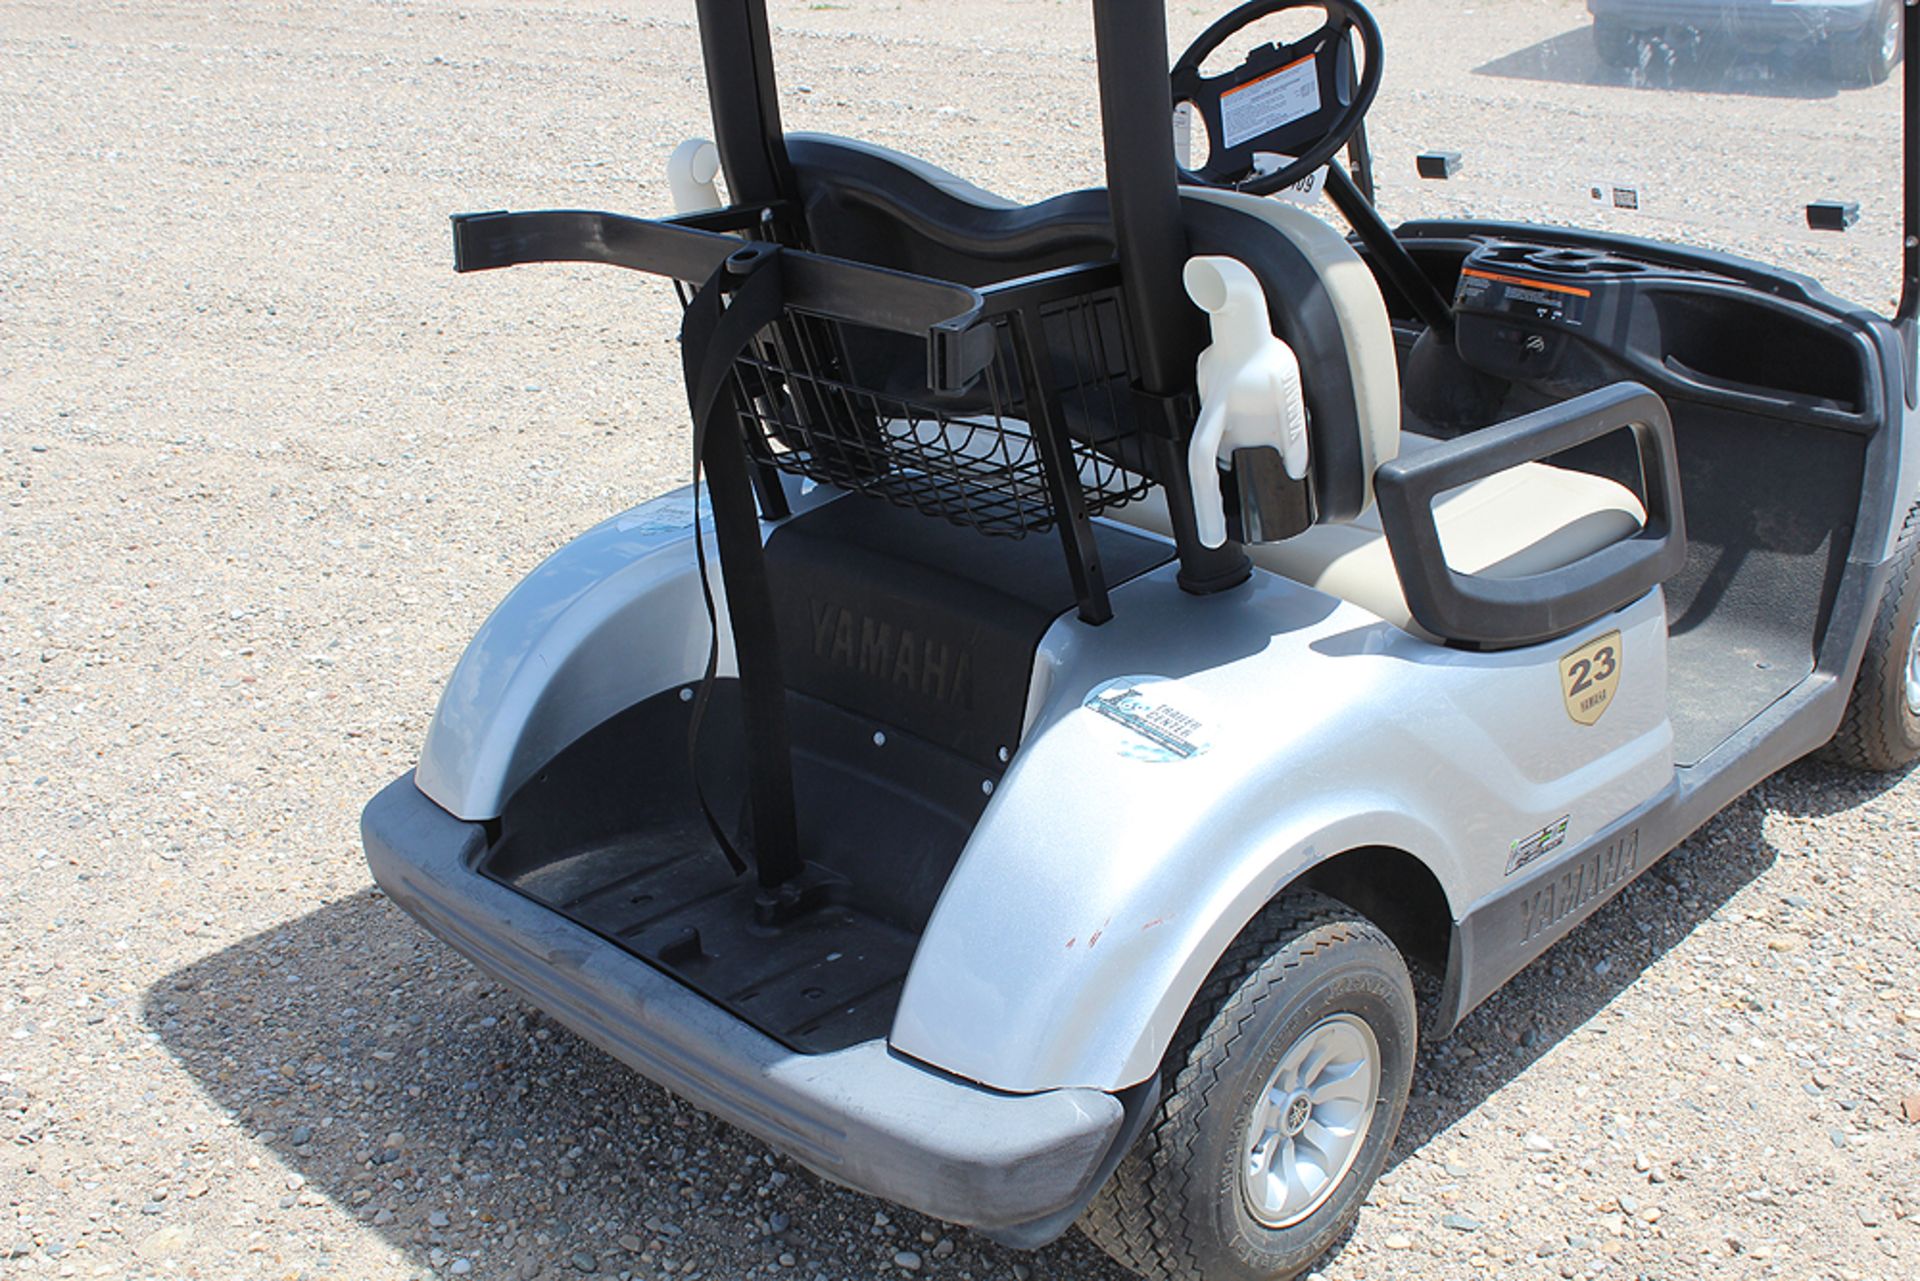 2014 YAMAHA GOLF CARTS, FUEL-INJECTED WITH ROOFS, IN EXCELLENT CONDITION - Image 4 of 5